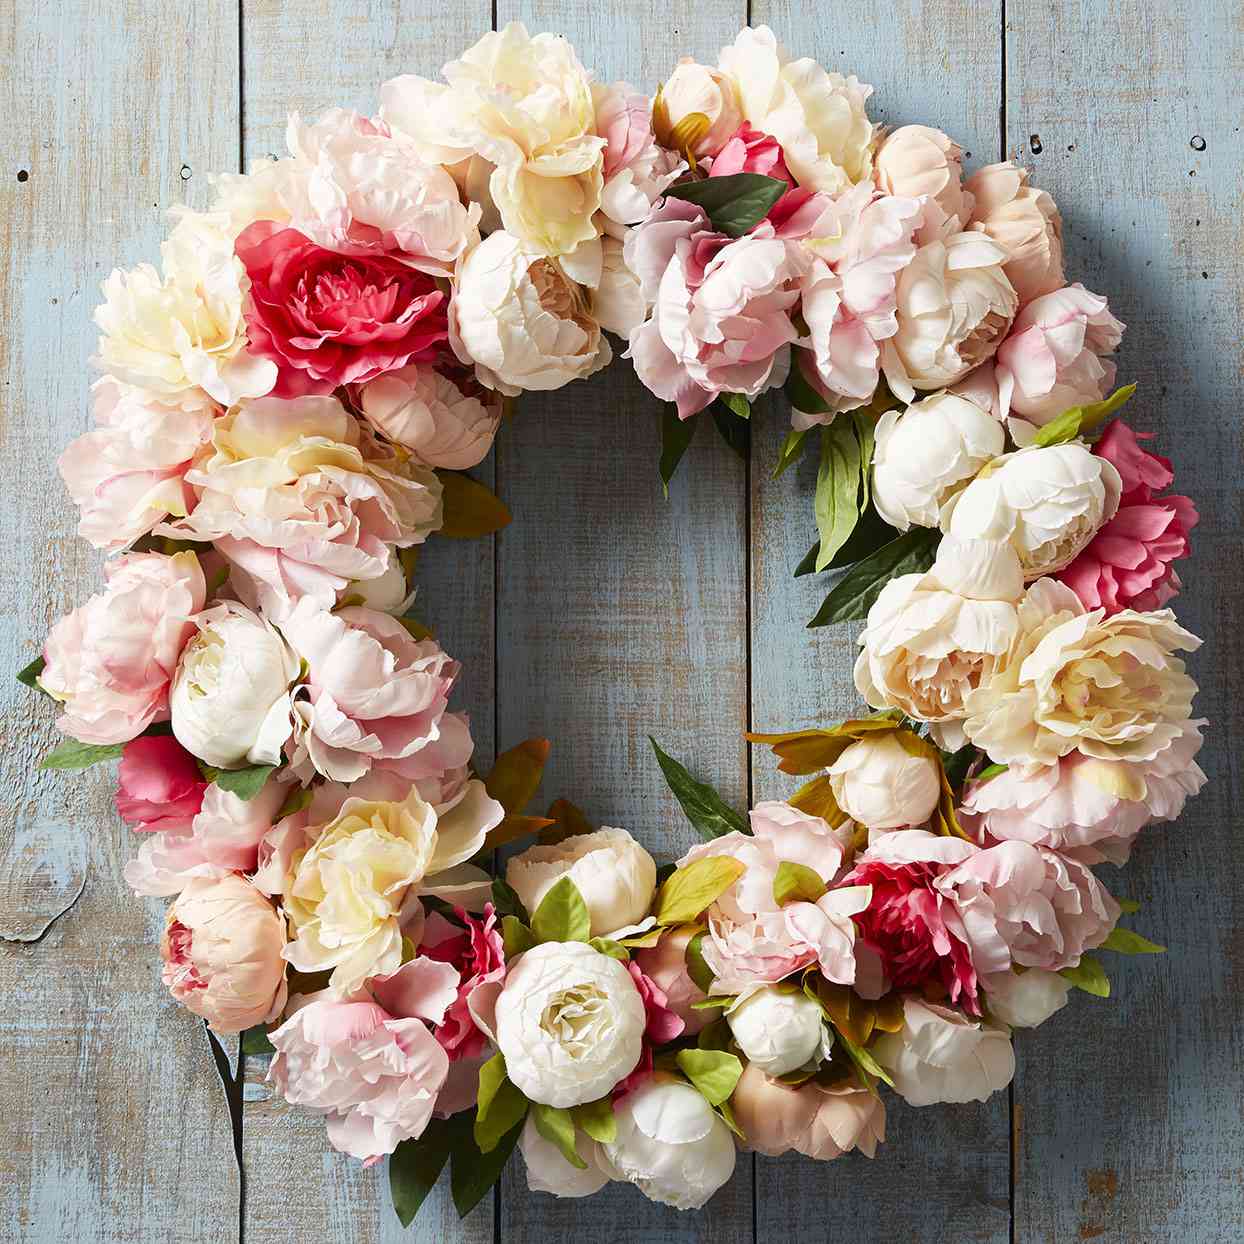 Artificial Flowers Heart-shaped rose Wreath Spring Wreath Outdoor for Front Door